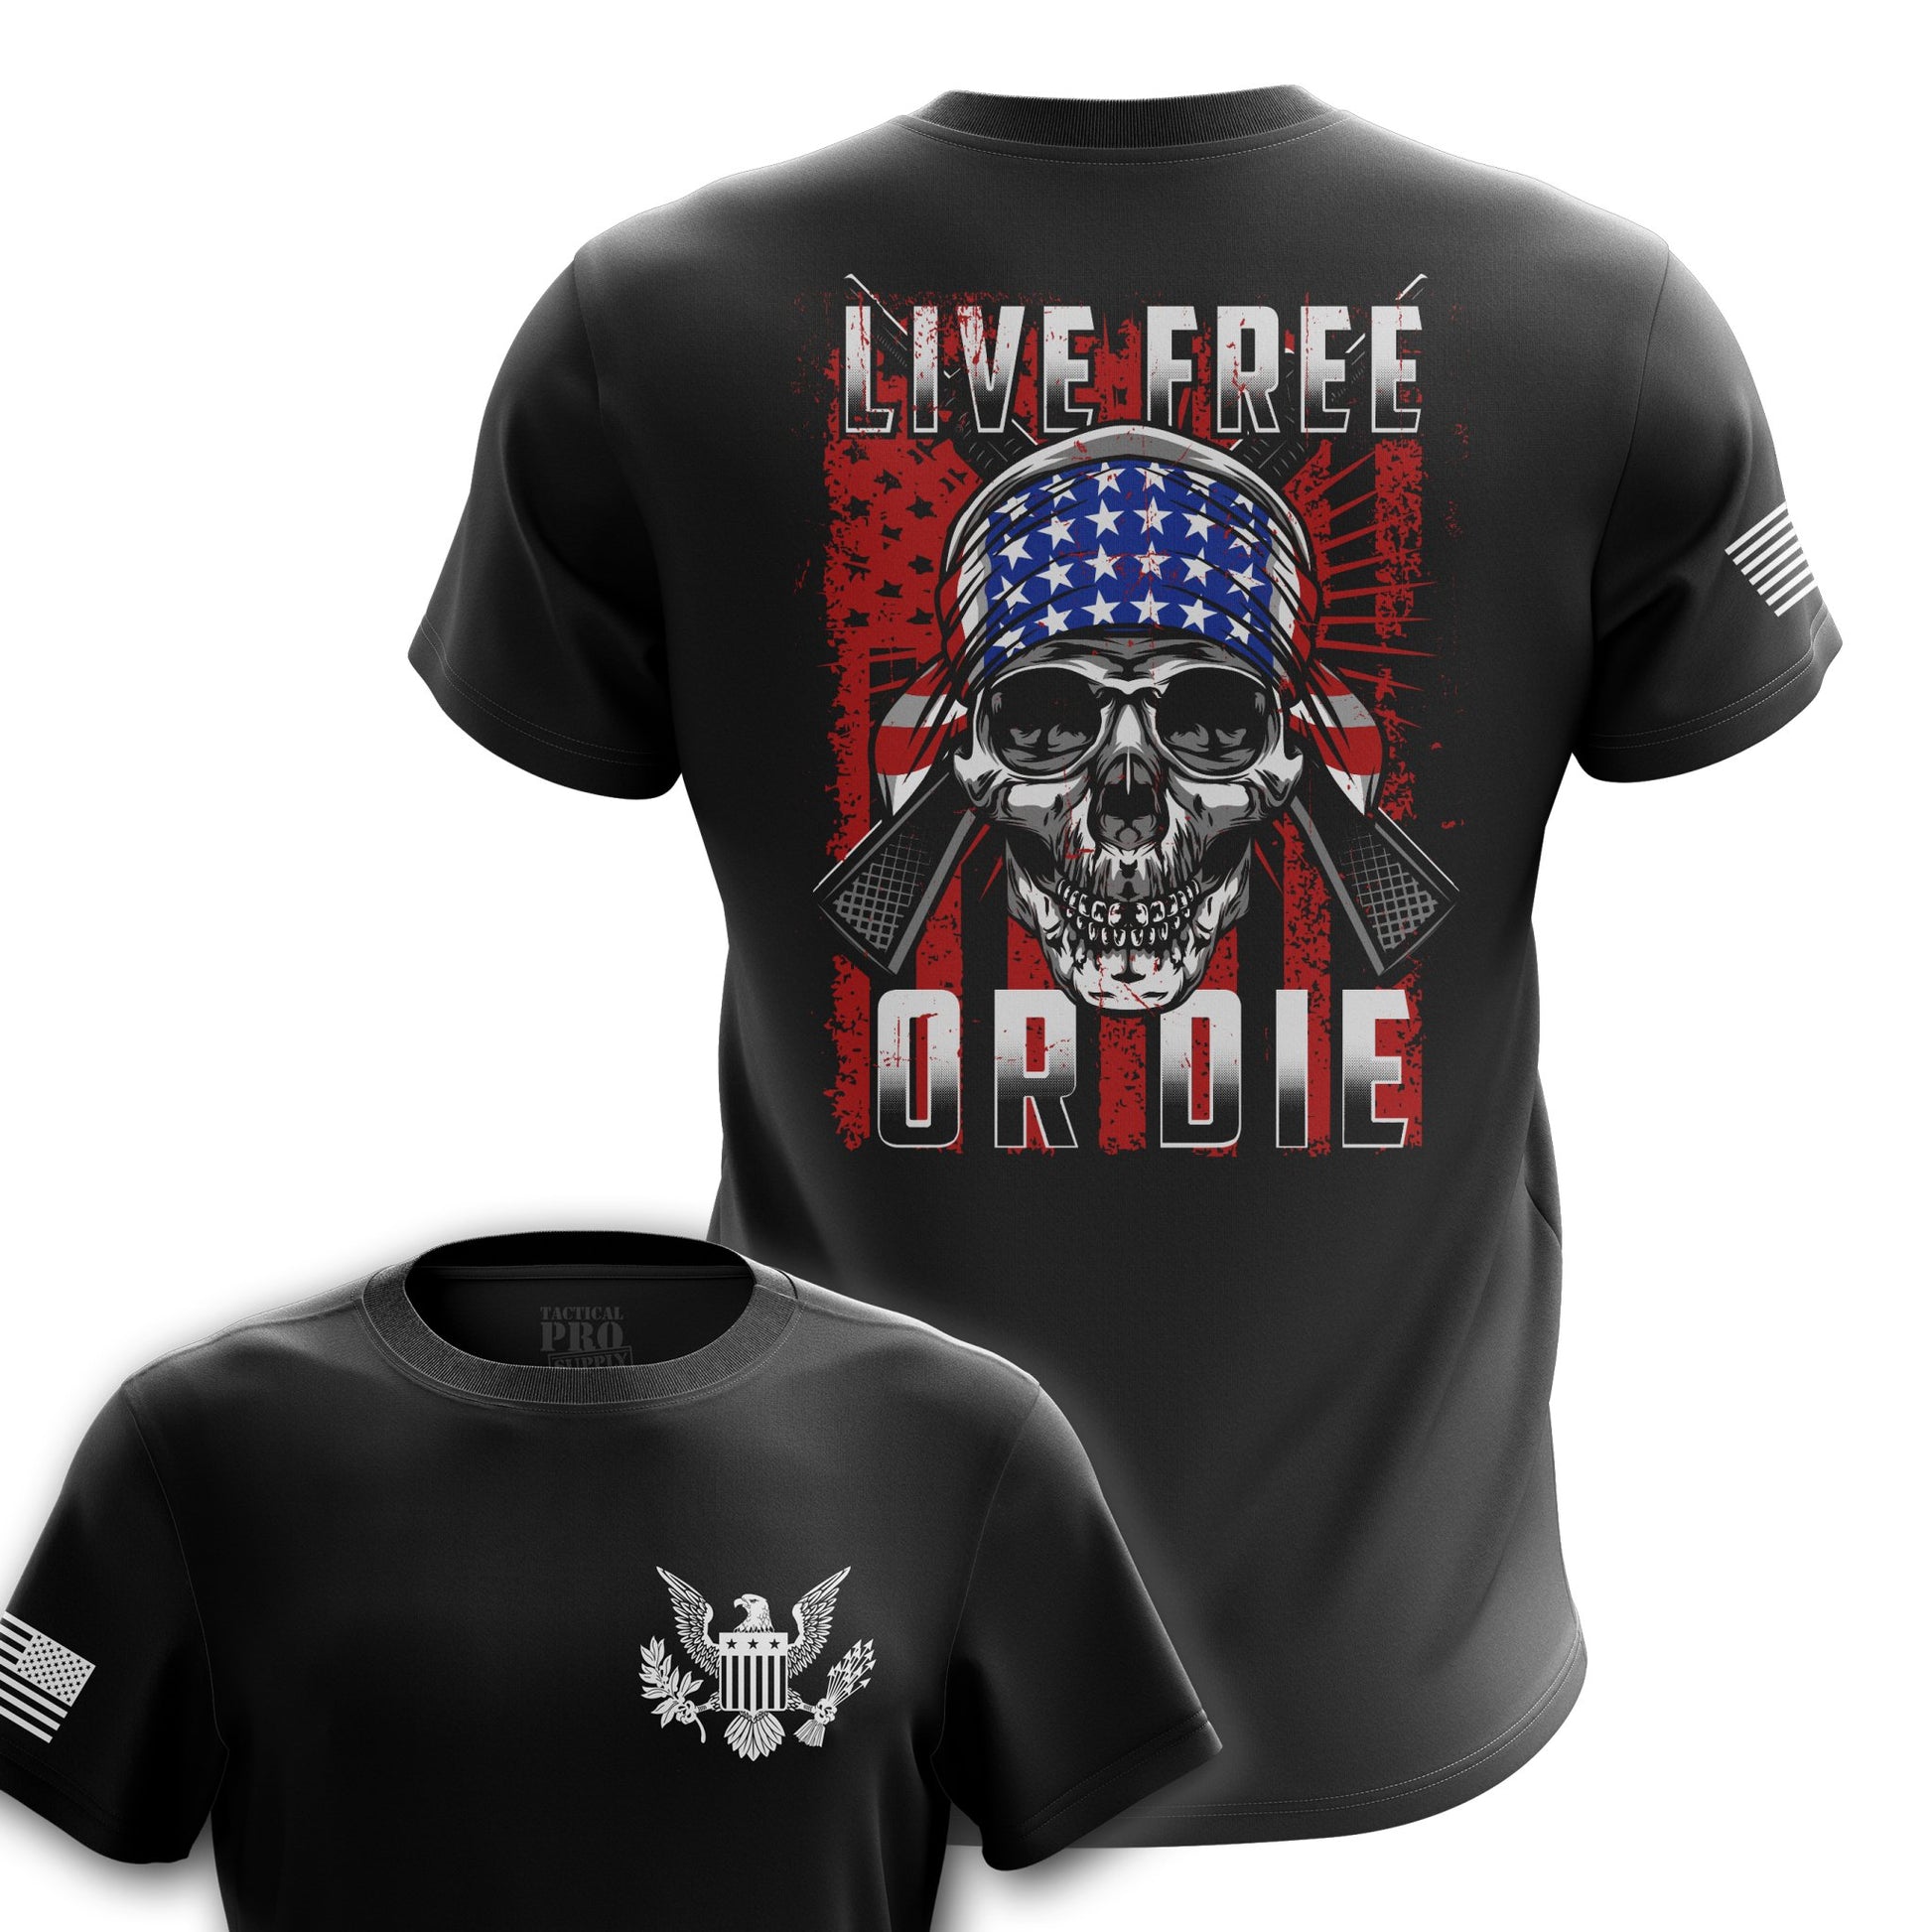 Live Free or Die - Tactical Pro Supply, LLC